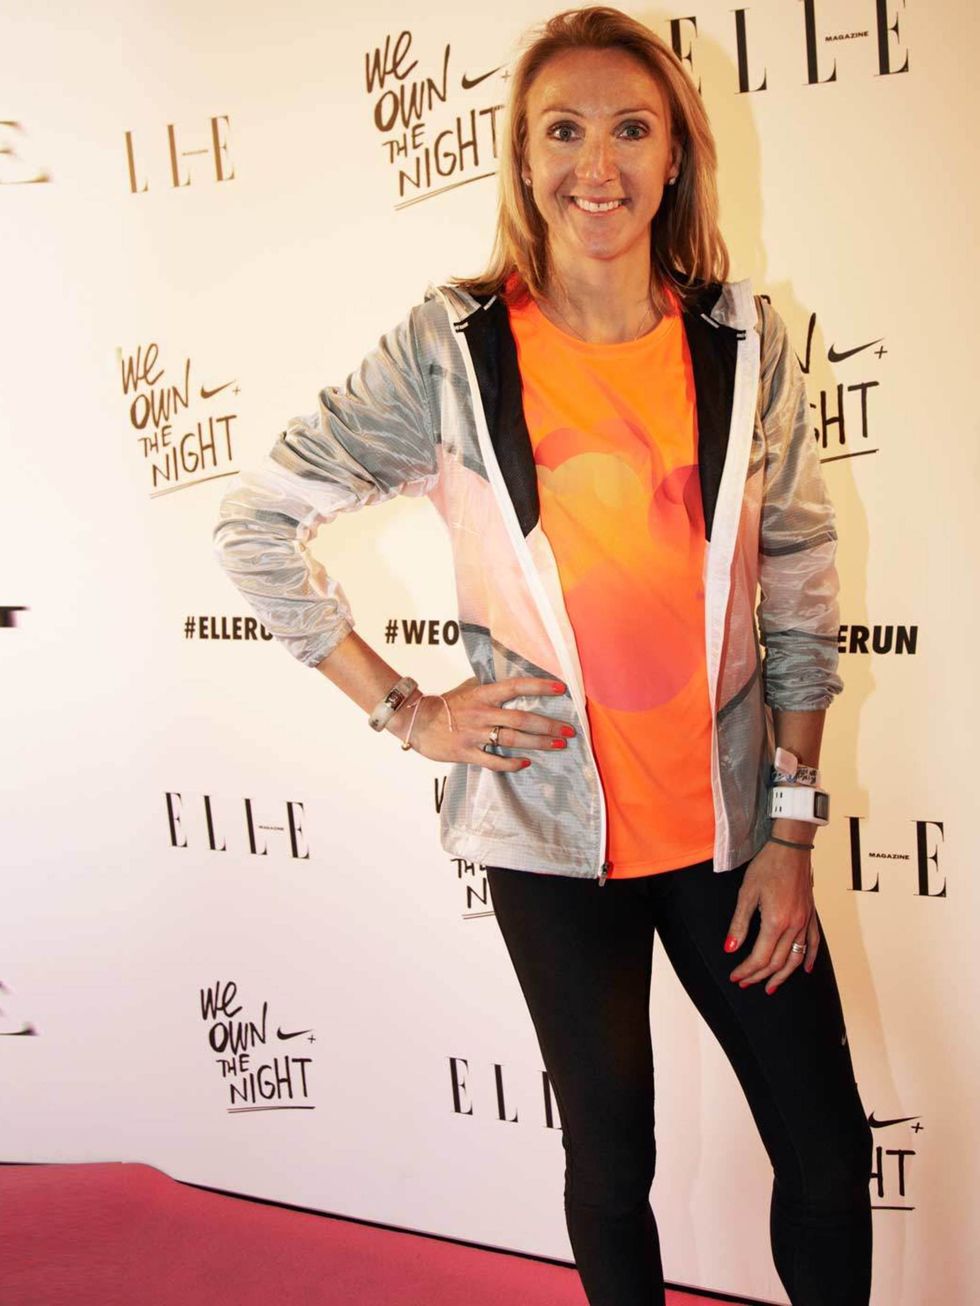 <p>Paula Radcliffe at the #WeOwnTheNight event.</p>